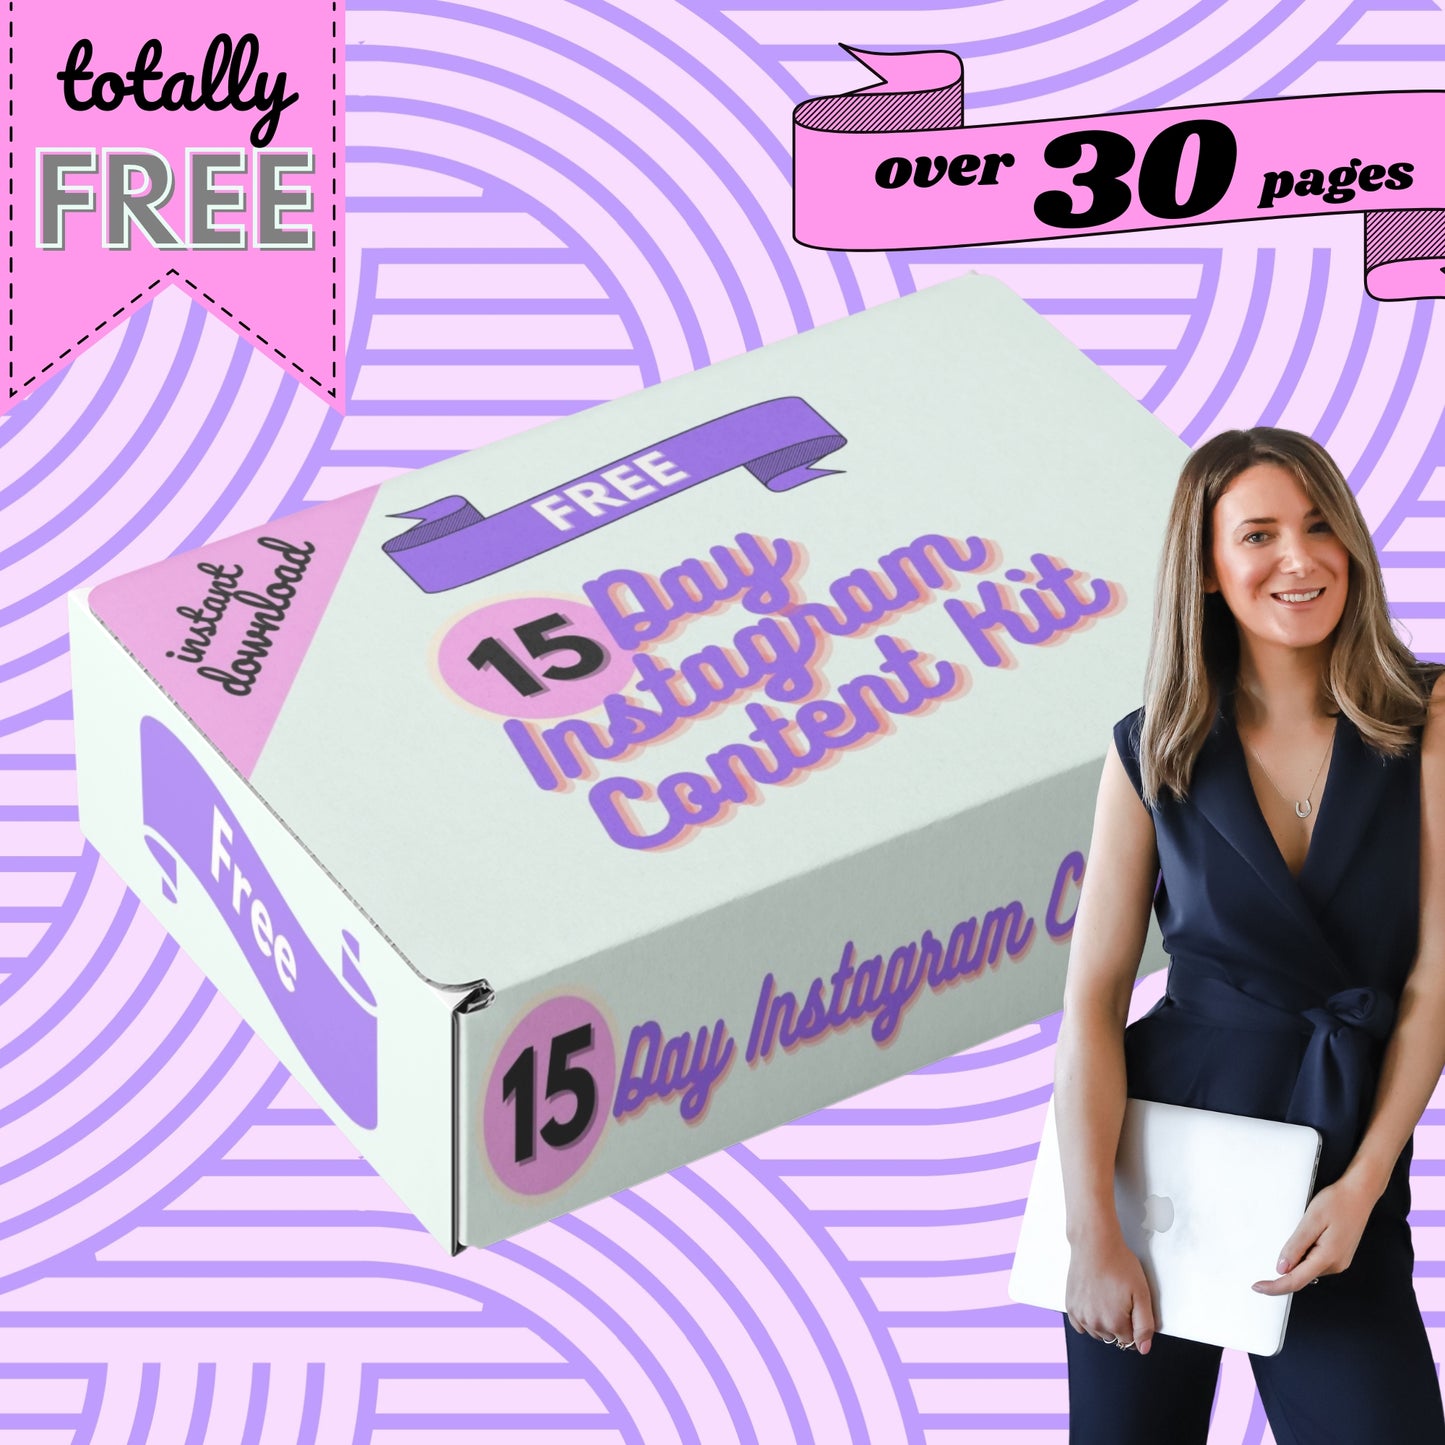 FREE 15 Day Instagram Content Kit - Instant download